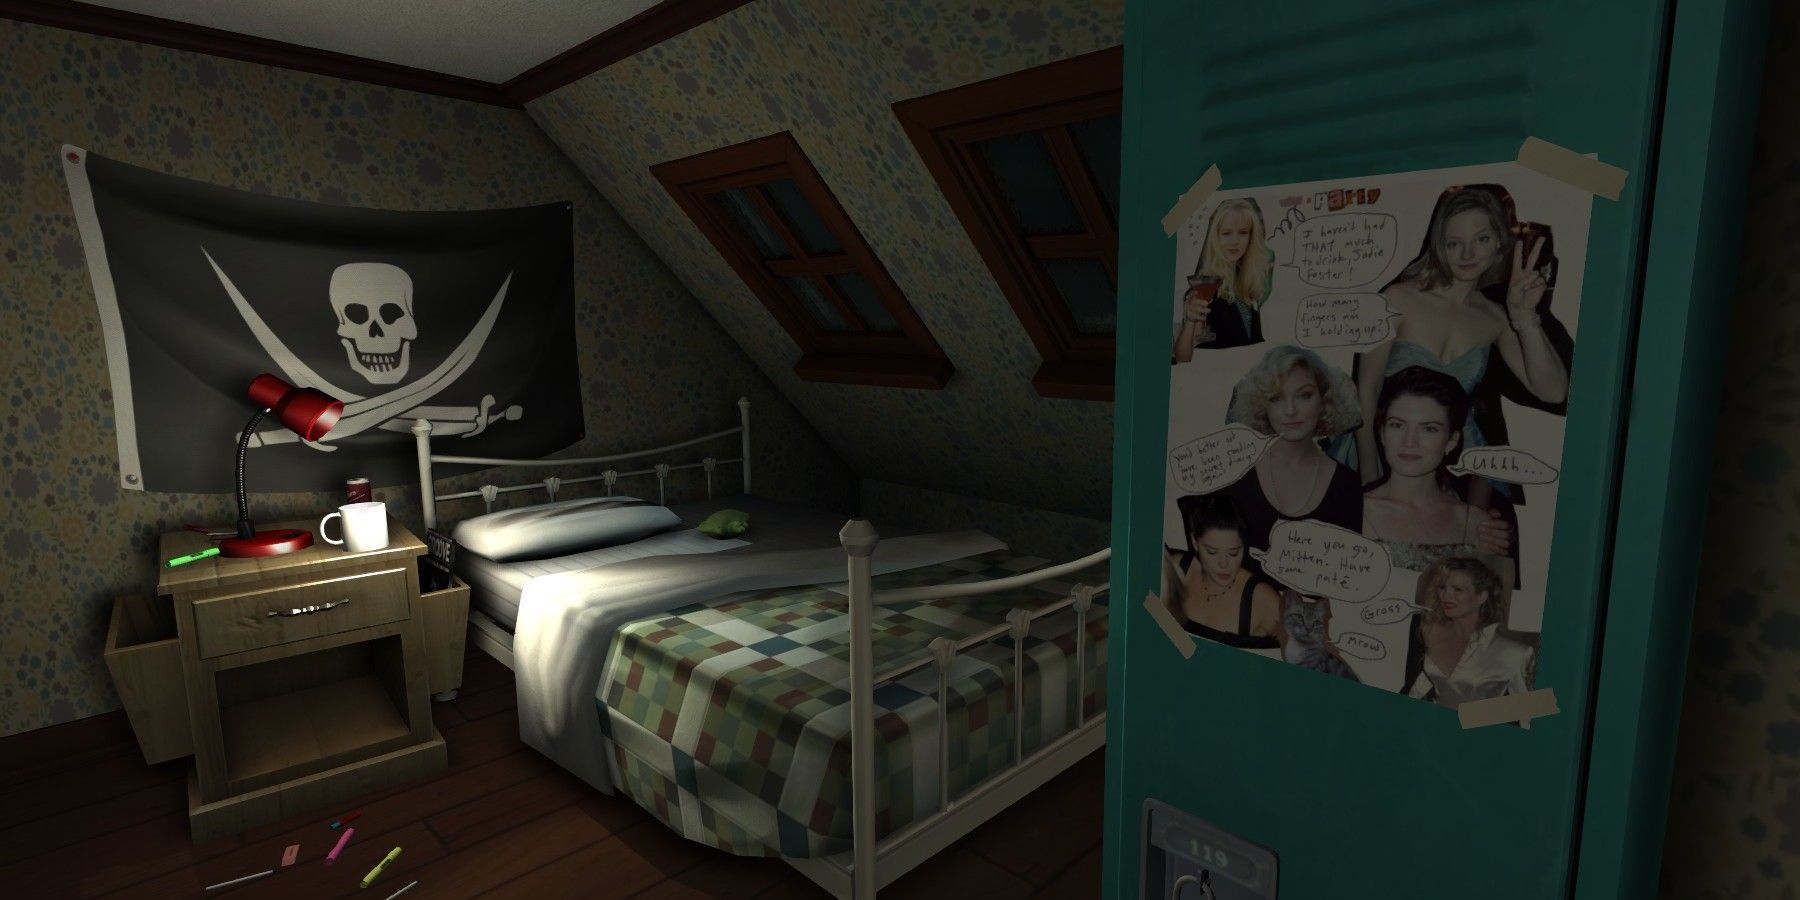 Bedroom with locker and pirate flag.